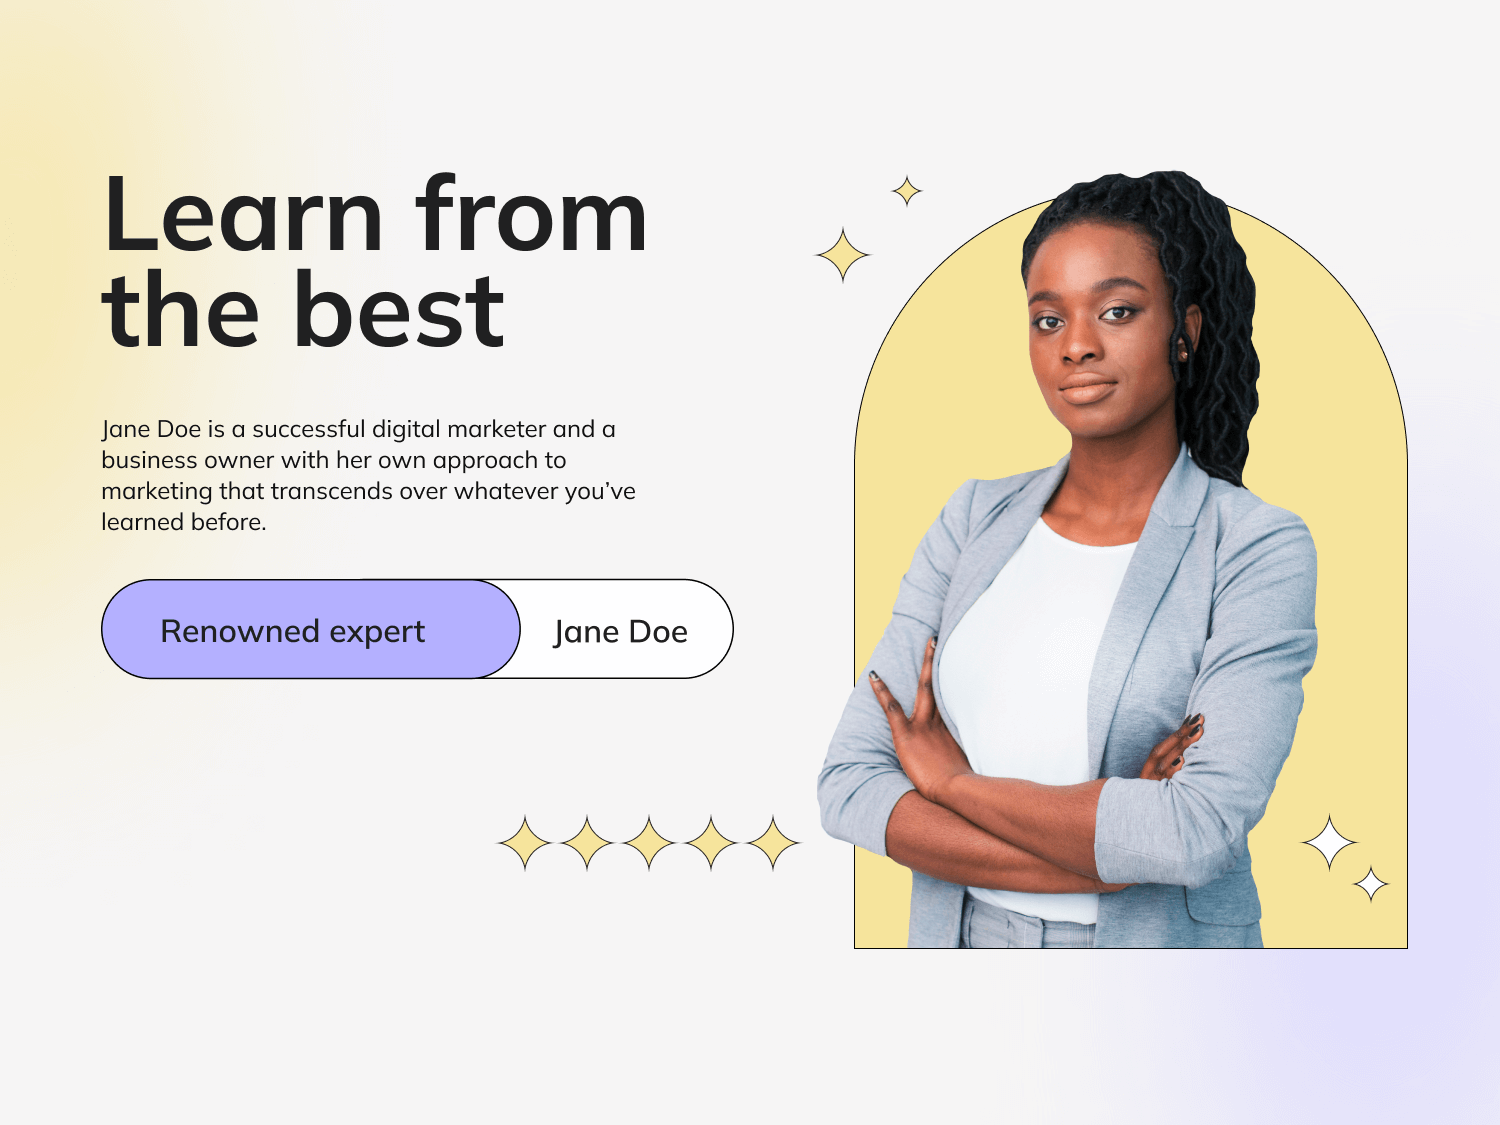 The online course landing page, info on the teachers, it says “Learn from the best. Jane Doe is a successful digital marketer and a business owner”.